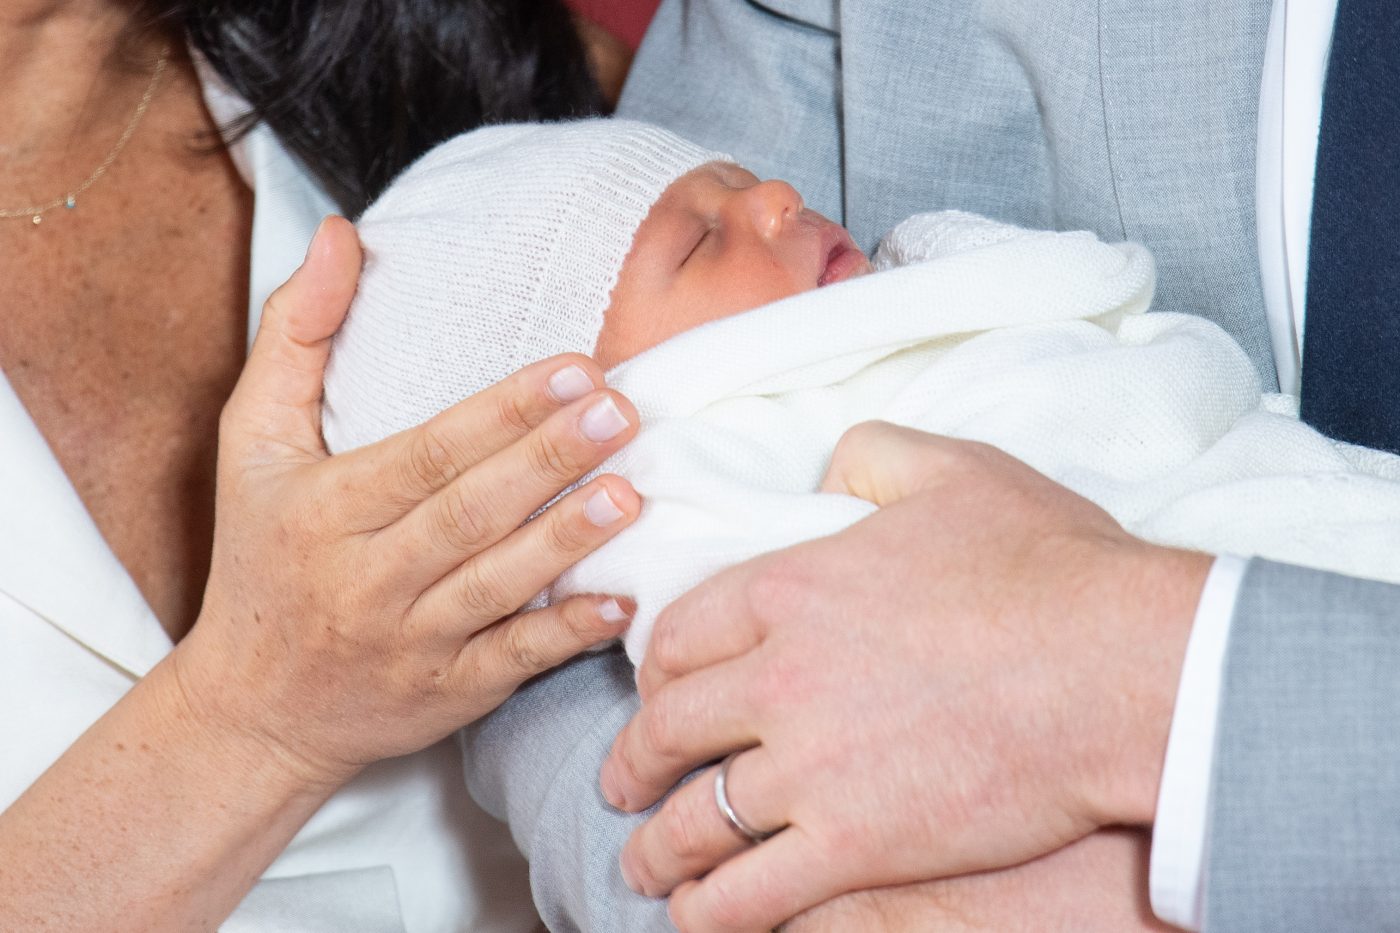 A close-up image of Meghan Markle and Prince Harry's newborn son